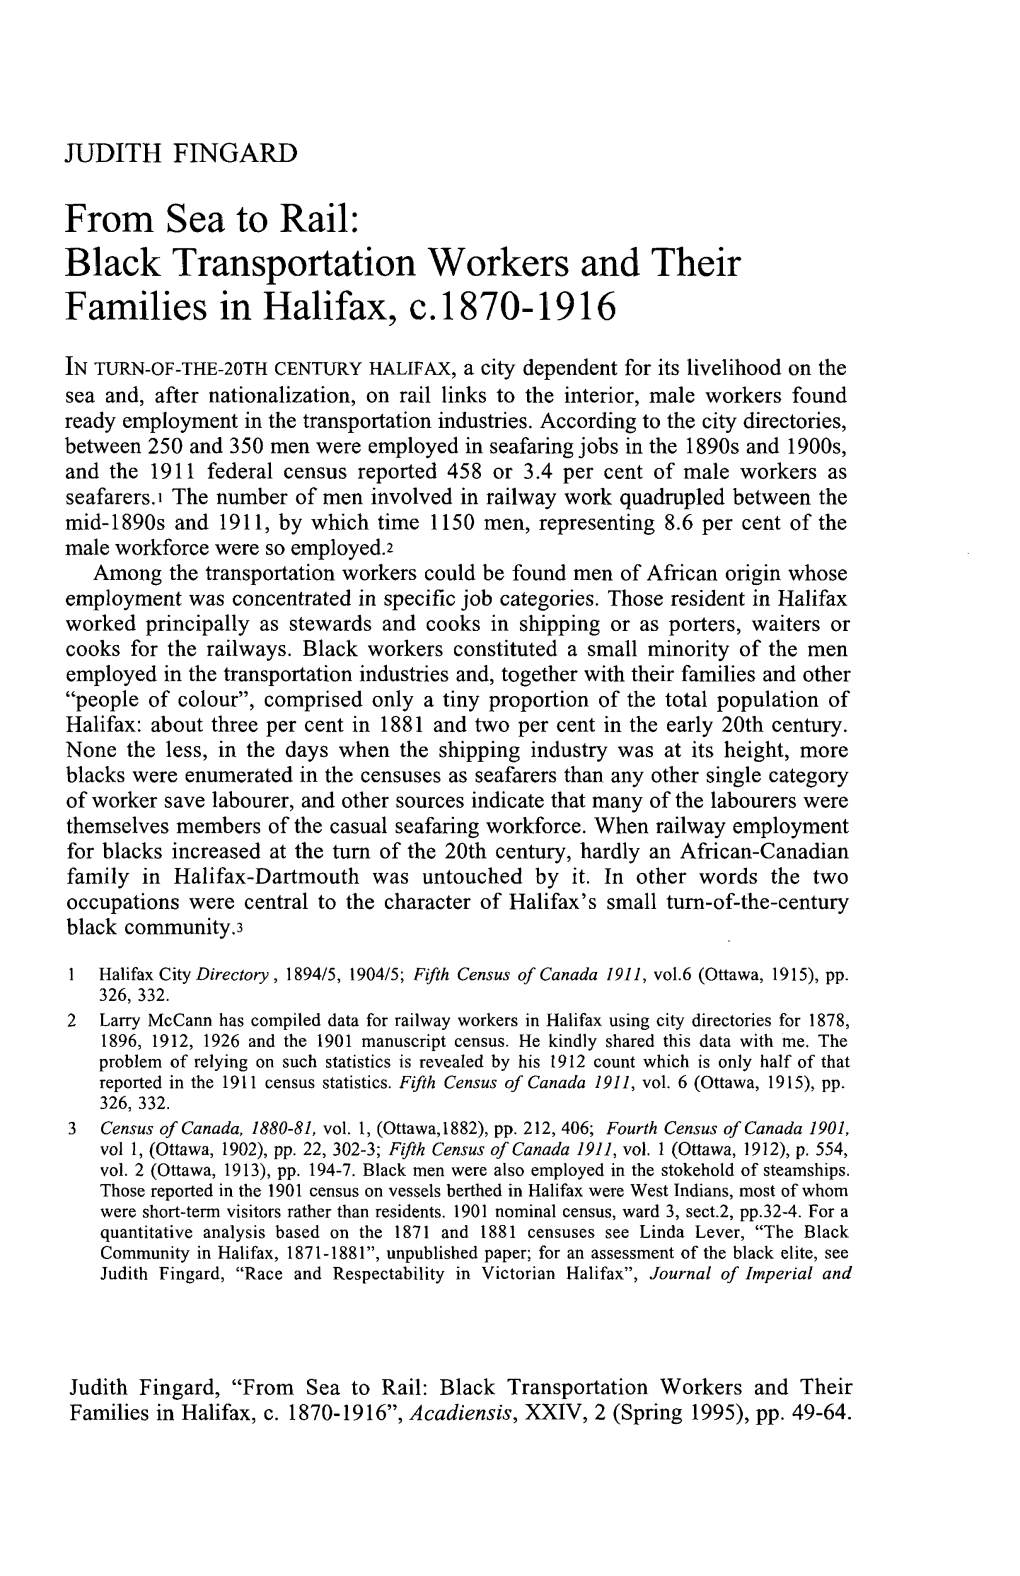 Black Transportation Workers and Their Families in Halifax, C.1870-1916